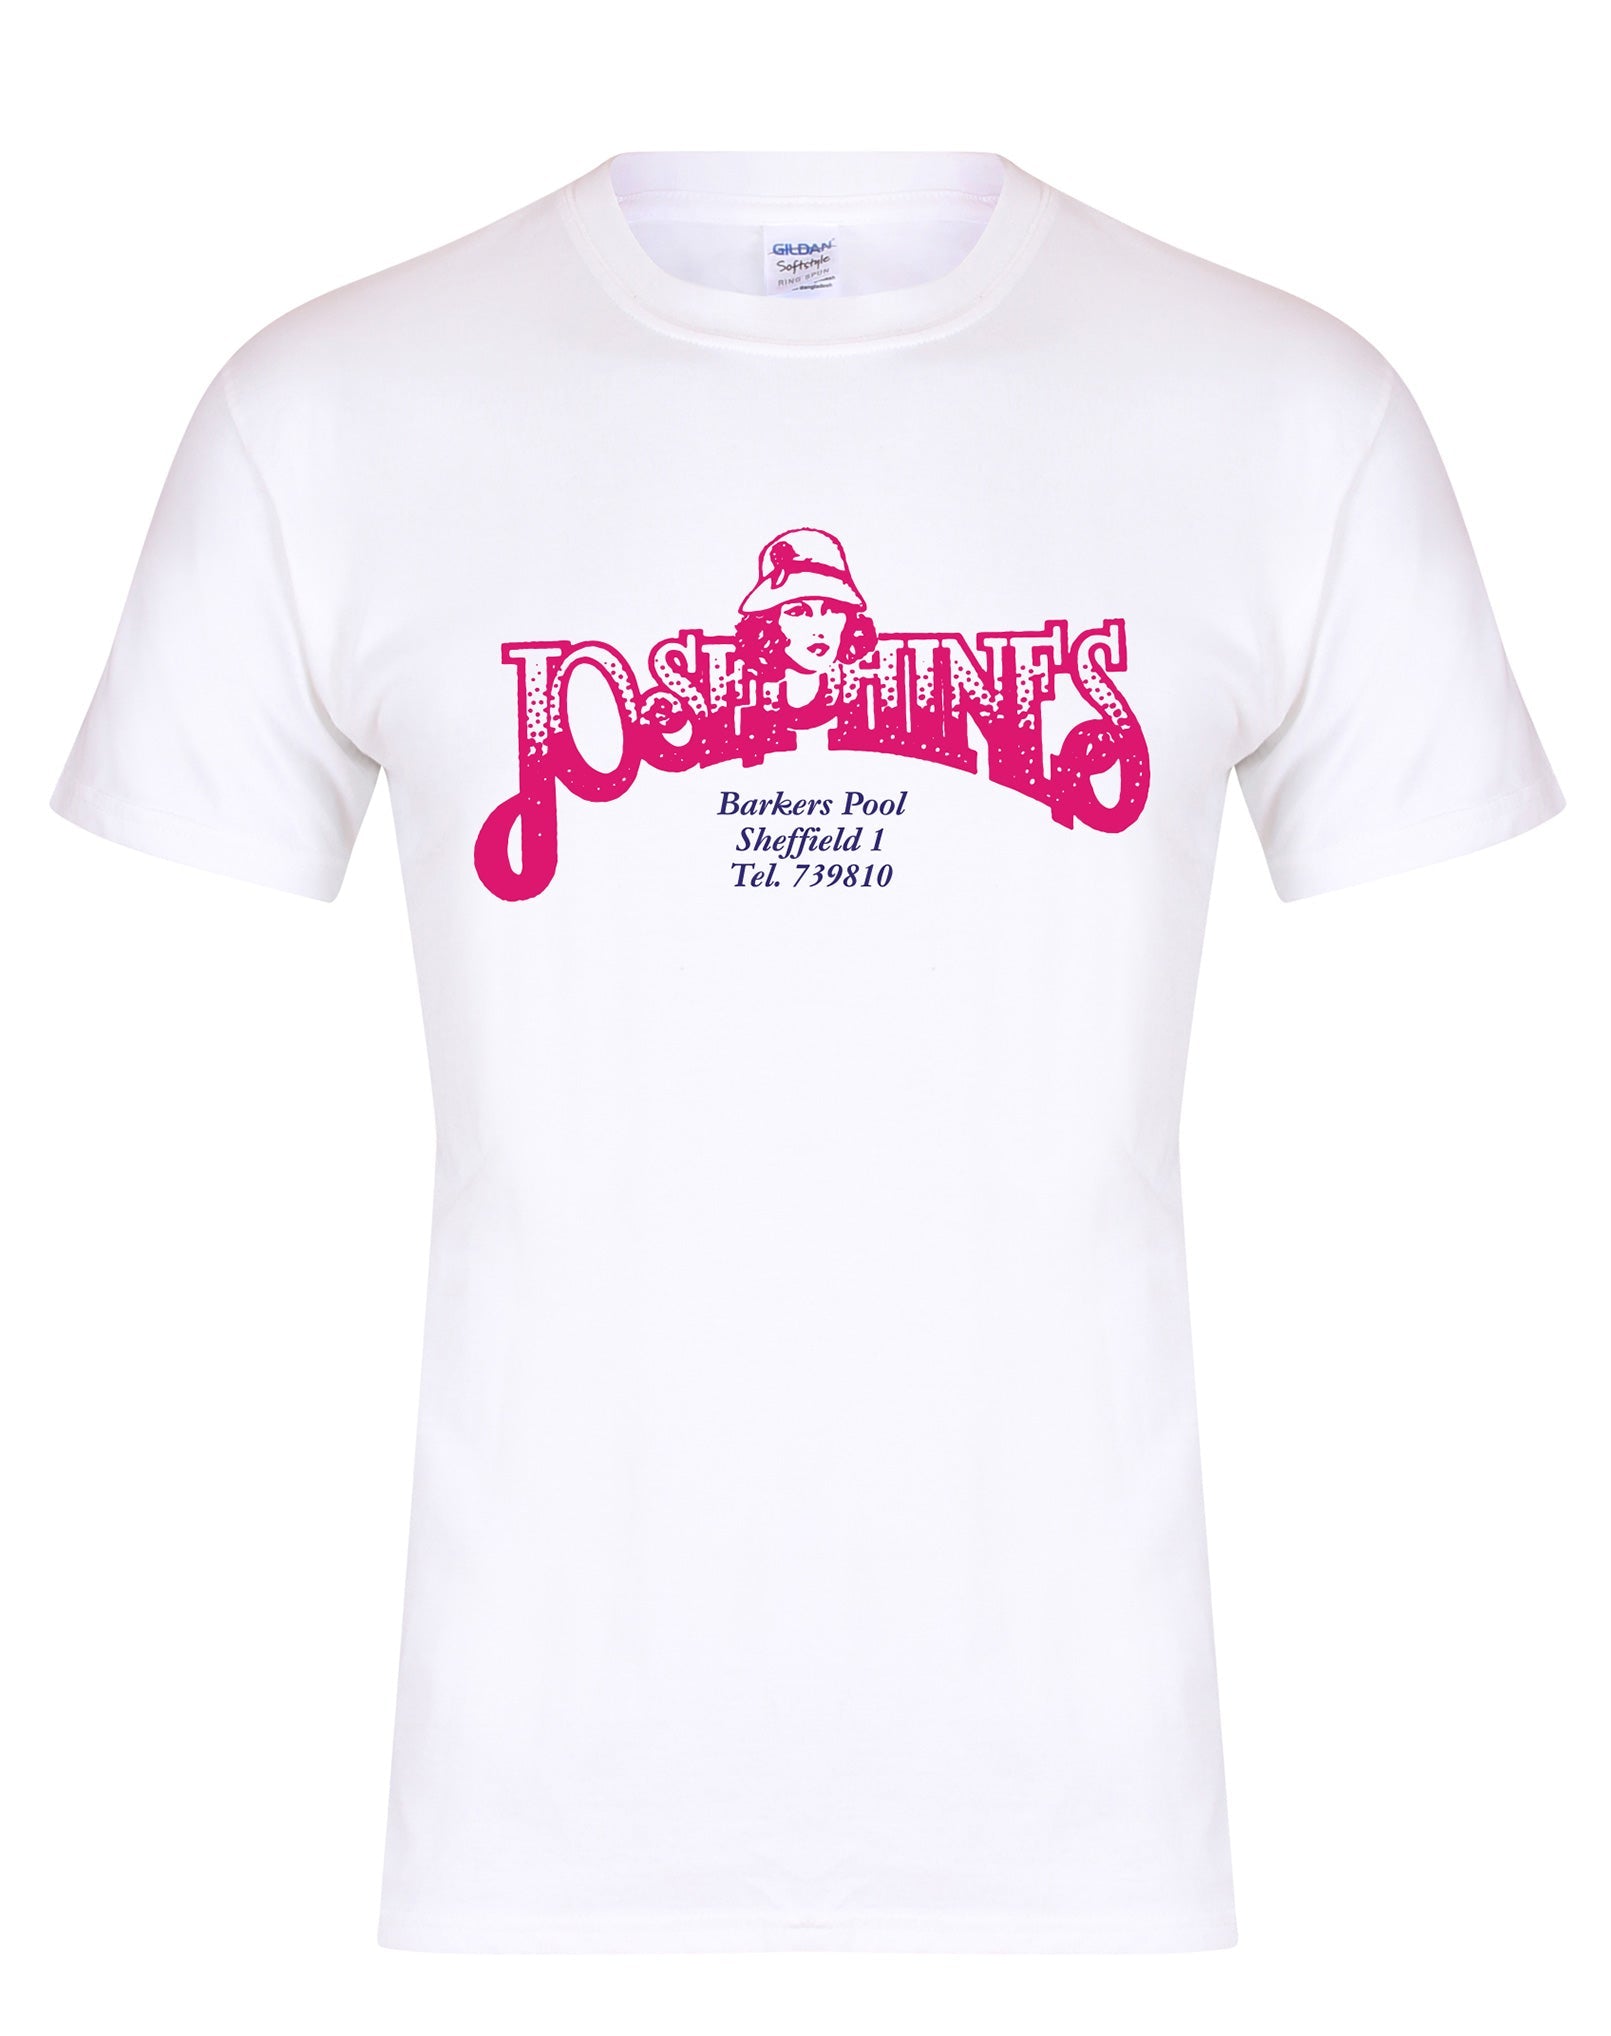 Josephines unisex fit T-shirt - various colours - Dirty Stop Outs